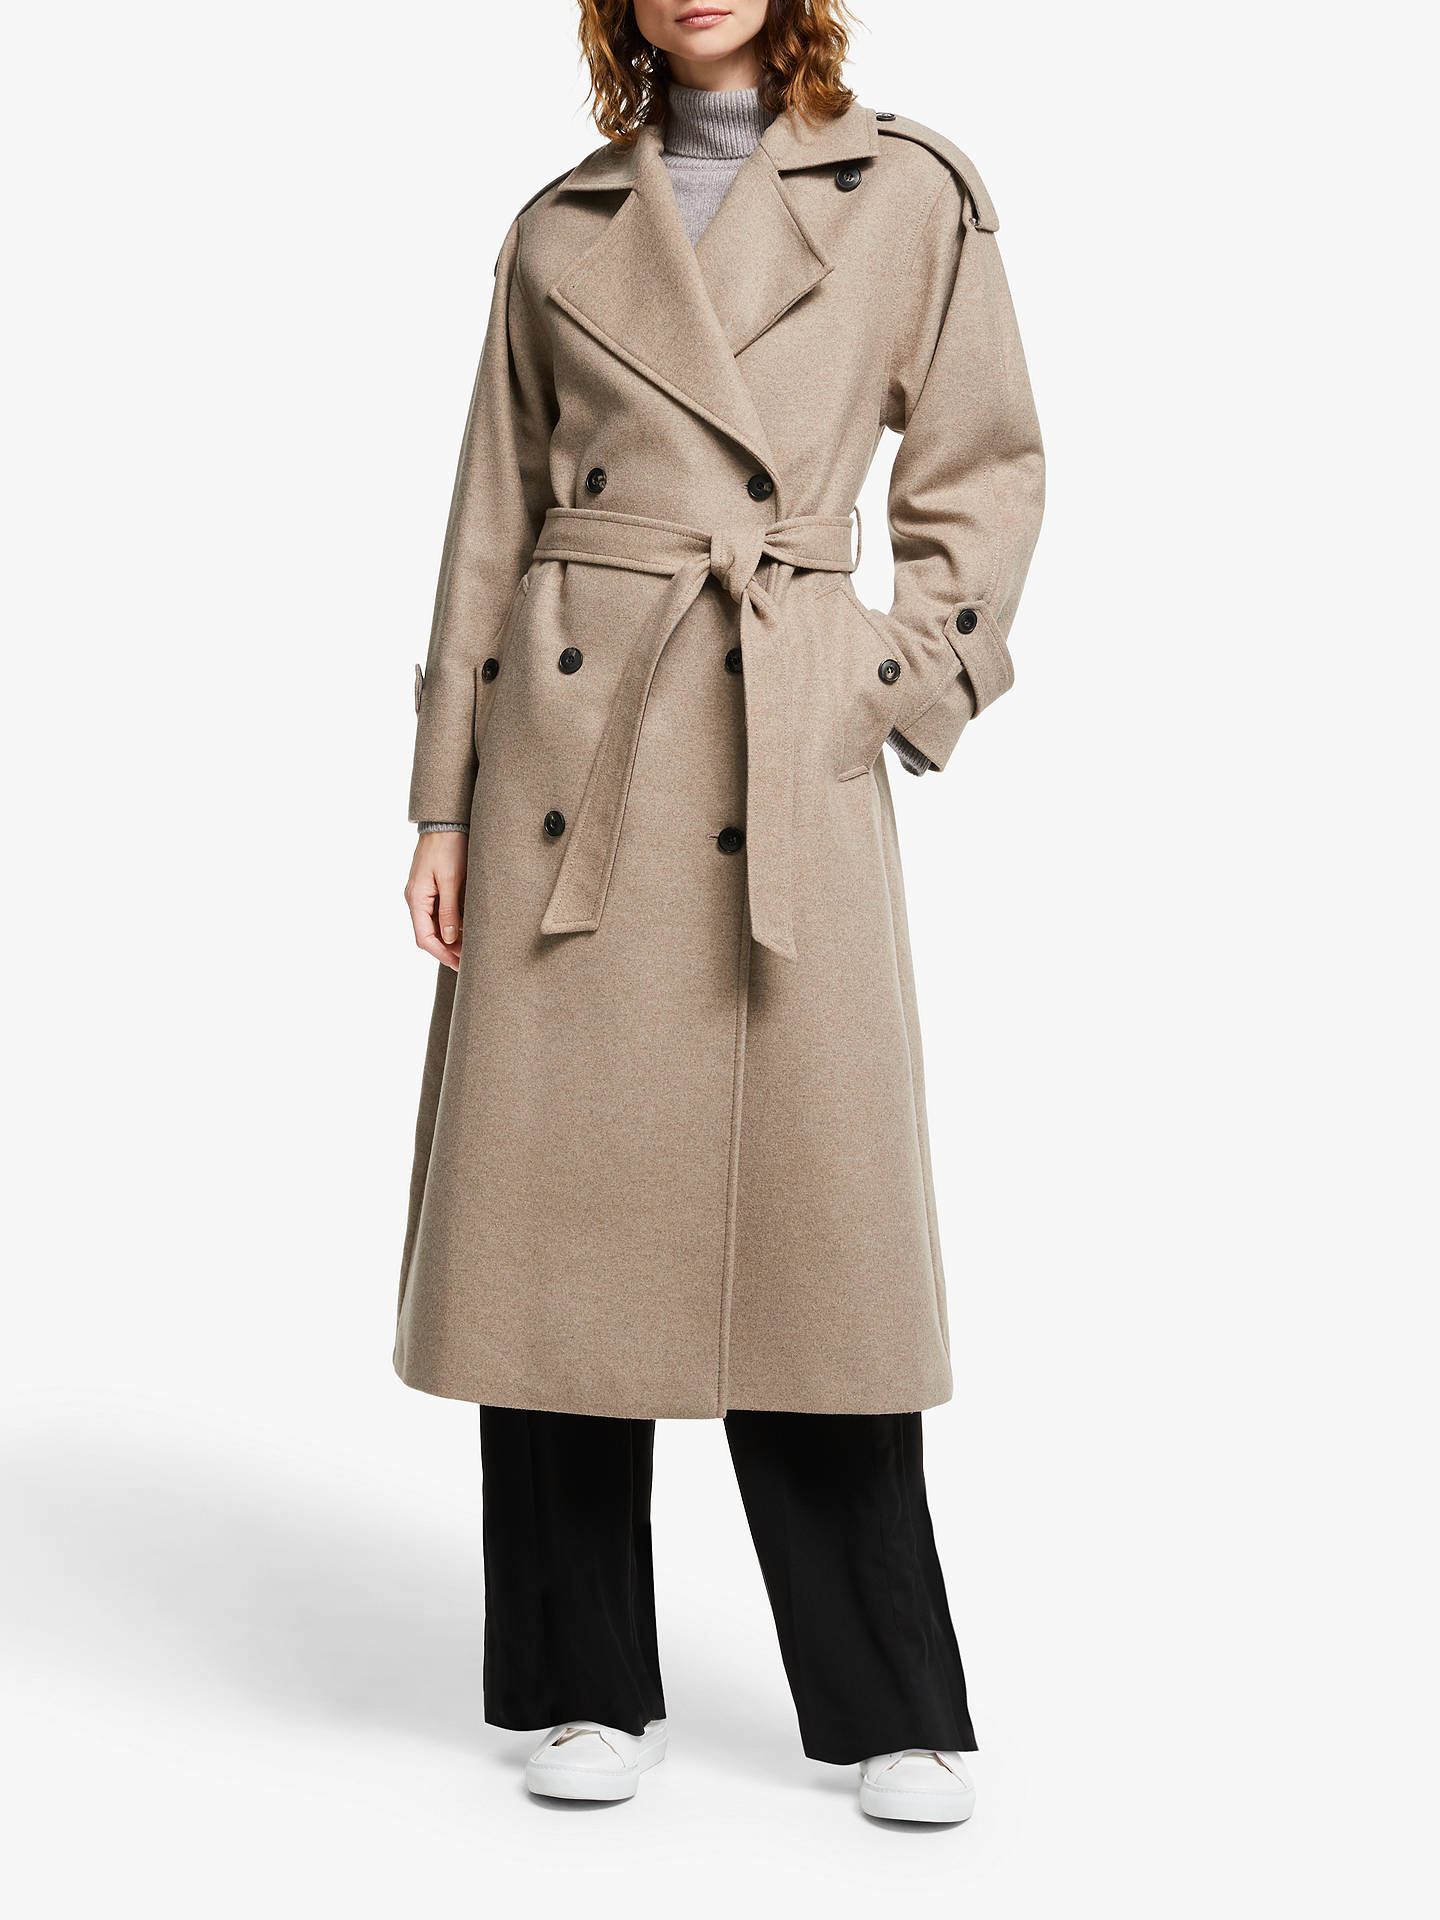 Modern Rarity Belted Trench Coat, Neutral at John Lewis & Partners